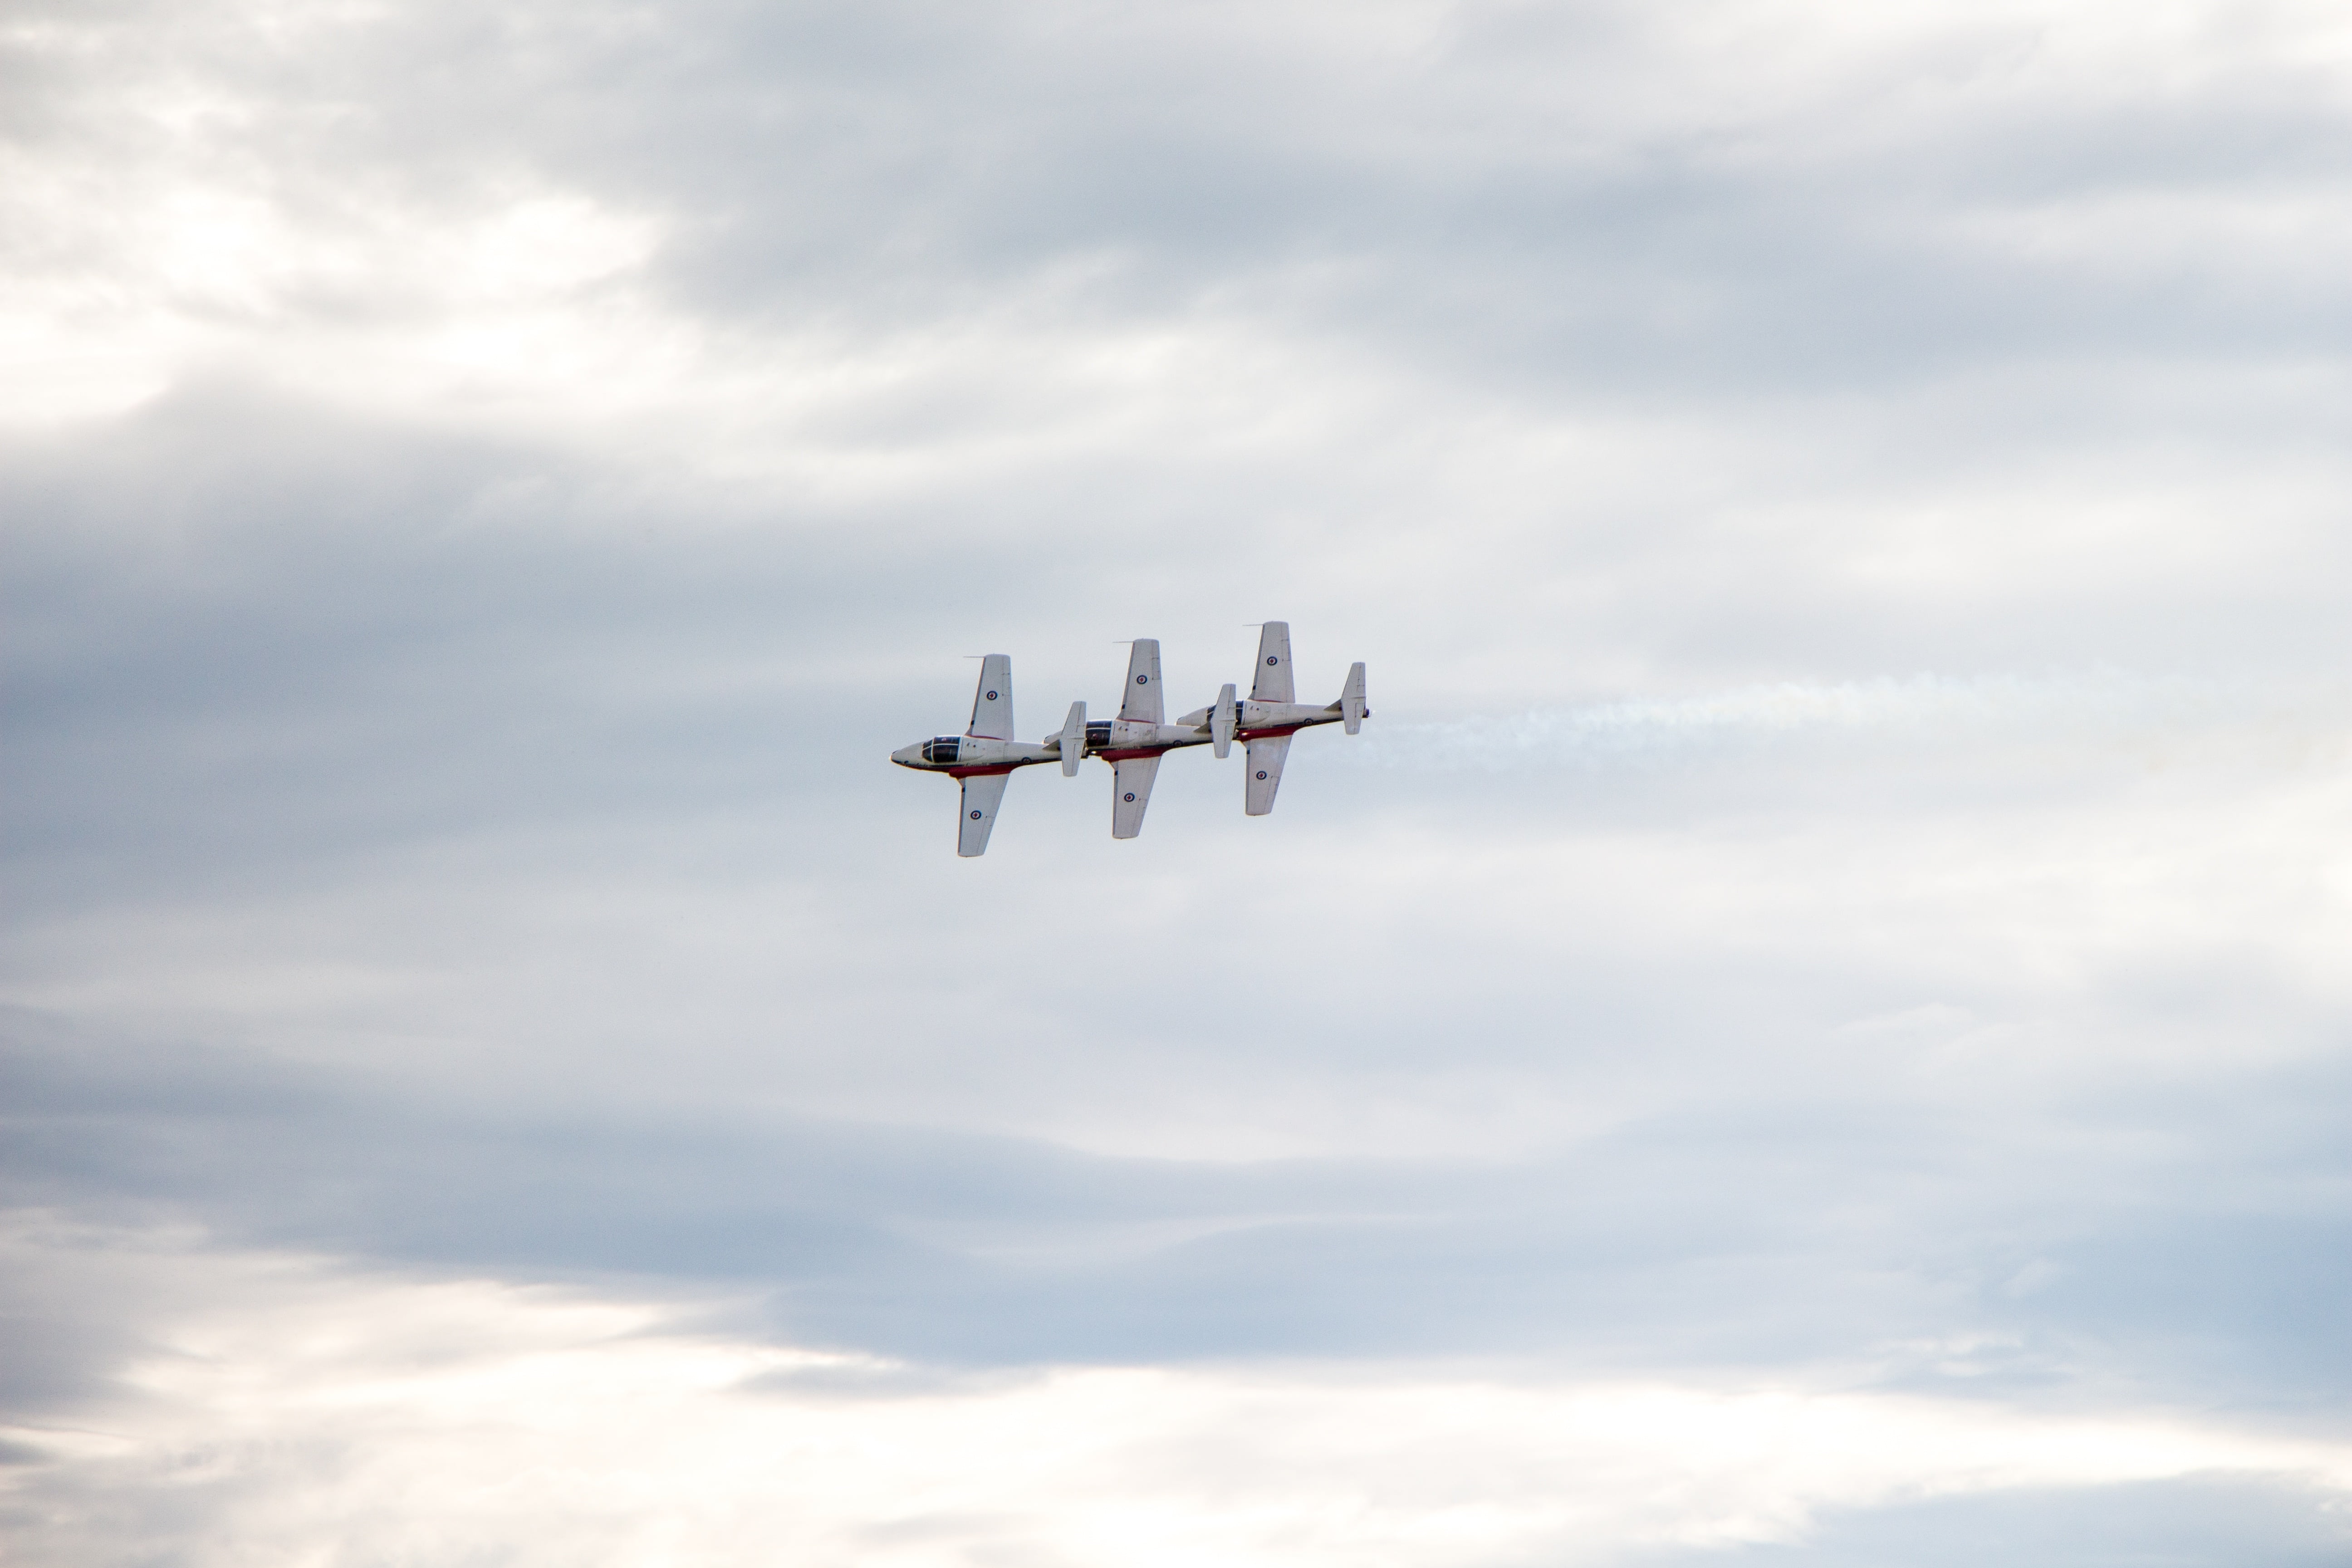 three flying white planes under cloudy sky during daytime, snowbirds